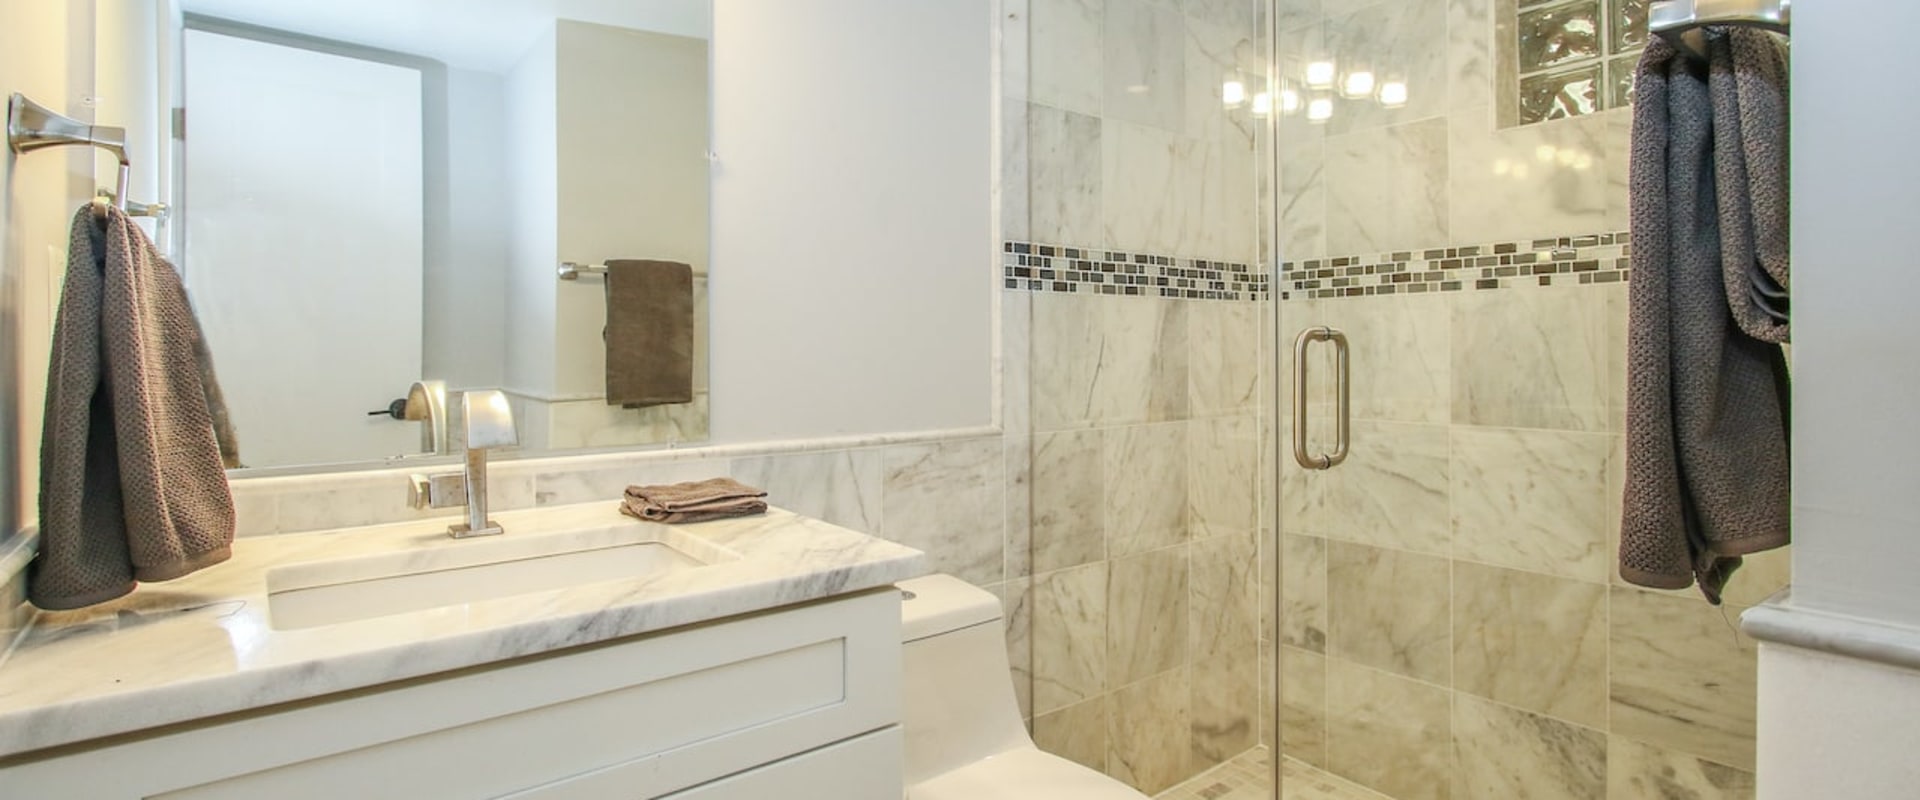 Expert Tips for Budgeting a Bathroom Remodel